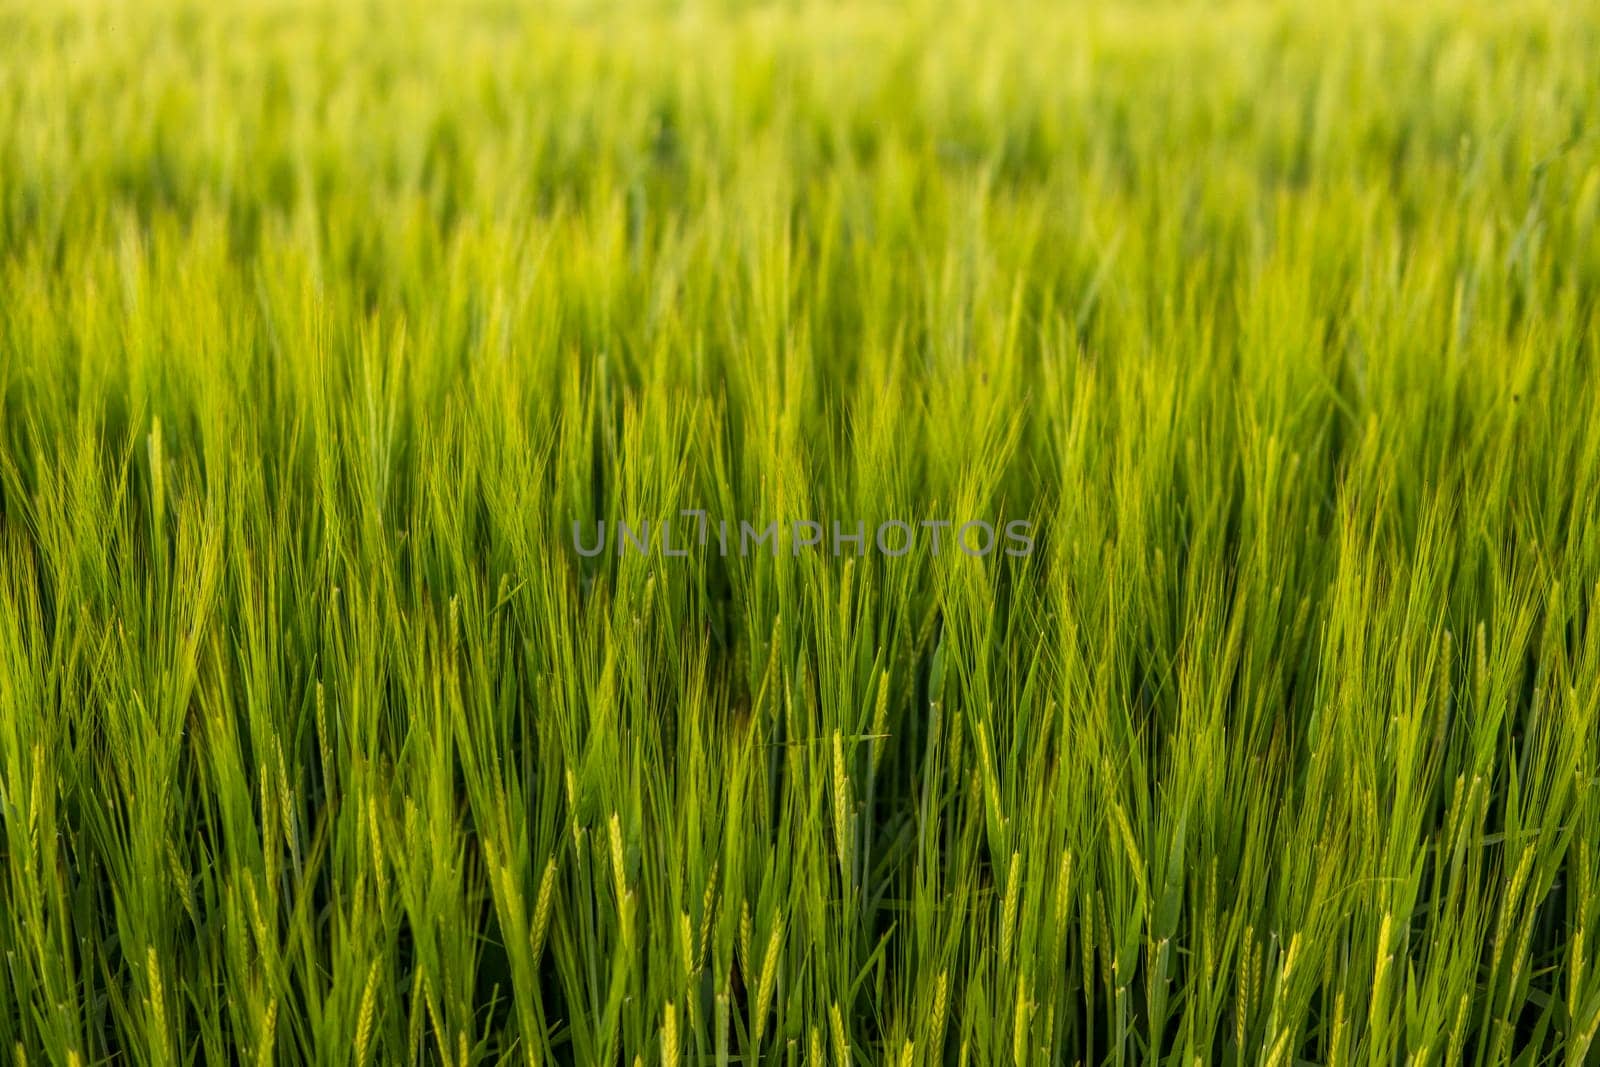 Green young unripe juicy spikelets of barley on a agricultural field. Harvest in spring or summer. Agriculture.